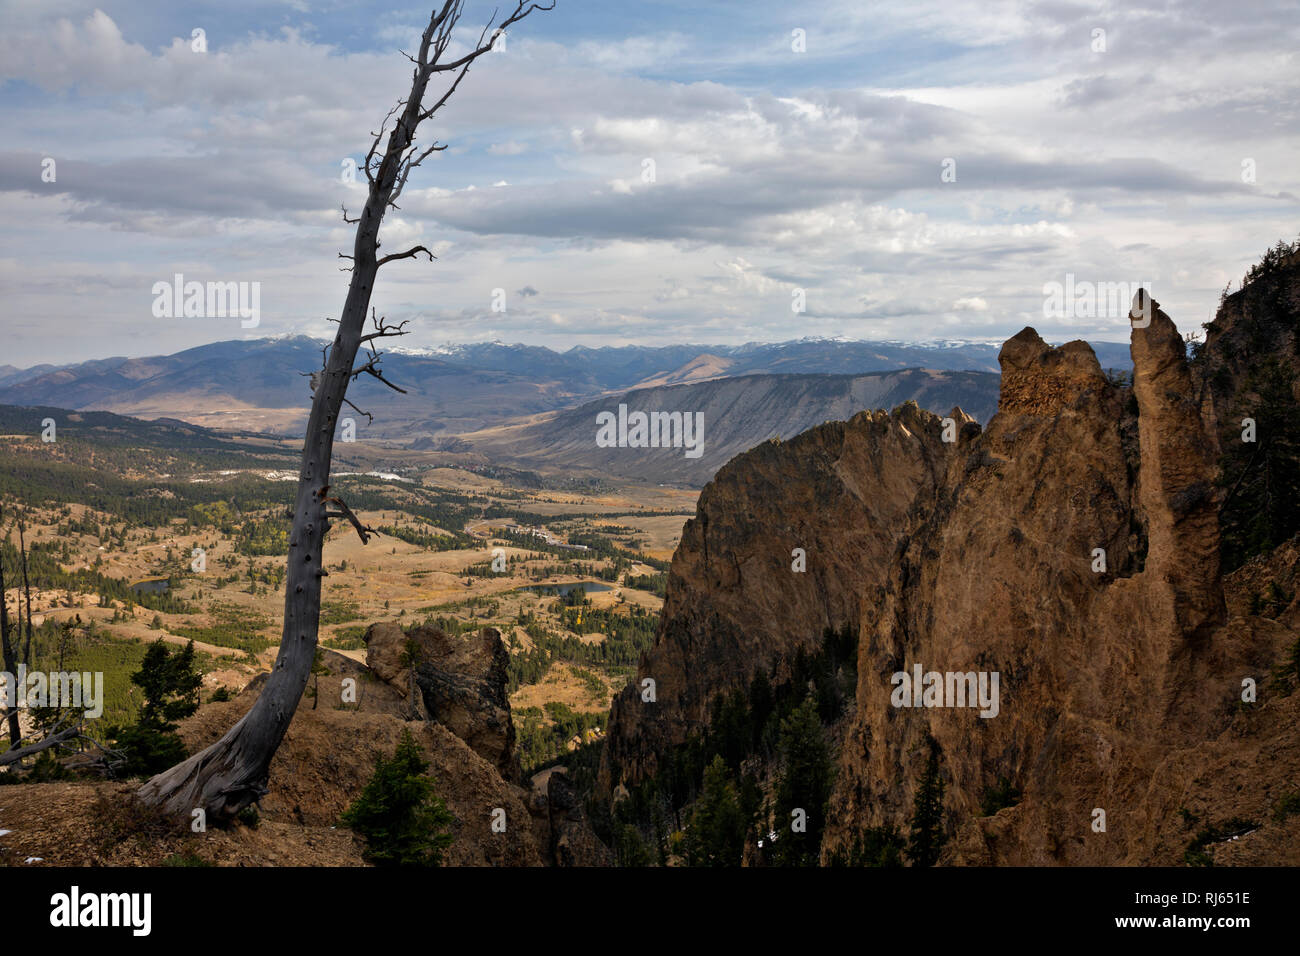 WY03150-00...WYOMING - Colorful cliffs and spires and a view of the Mammoth area seen from the Bunsen Peak Trail in Yellowstone National Park. Stock Photo